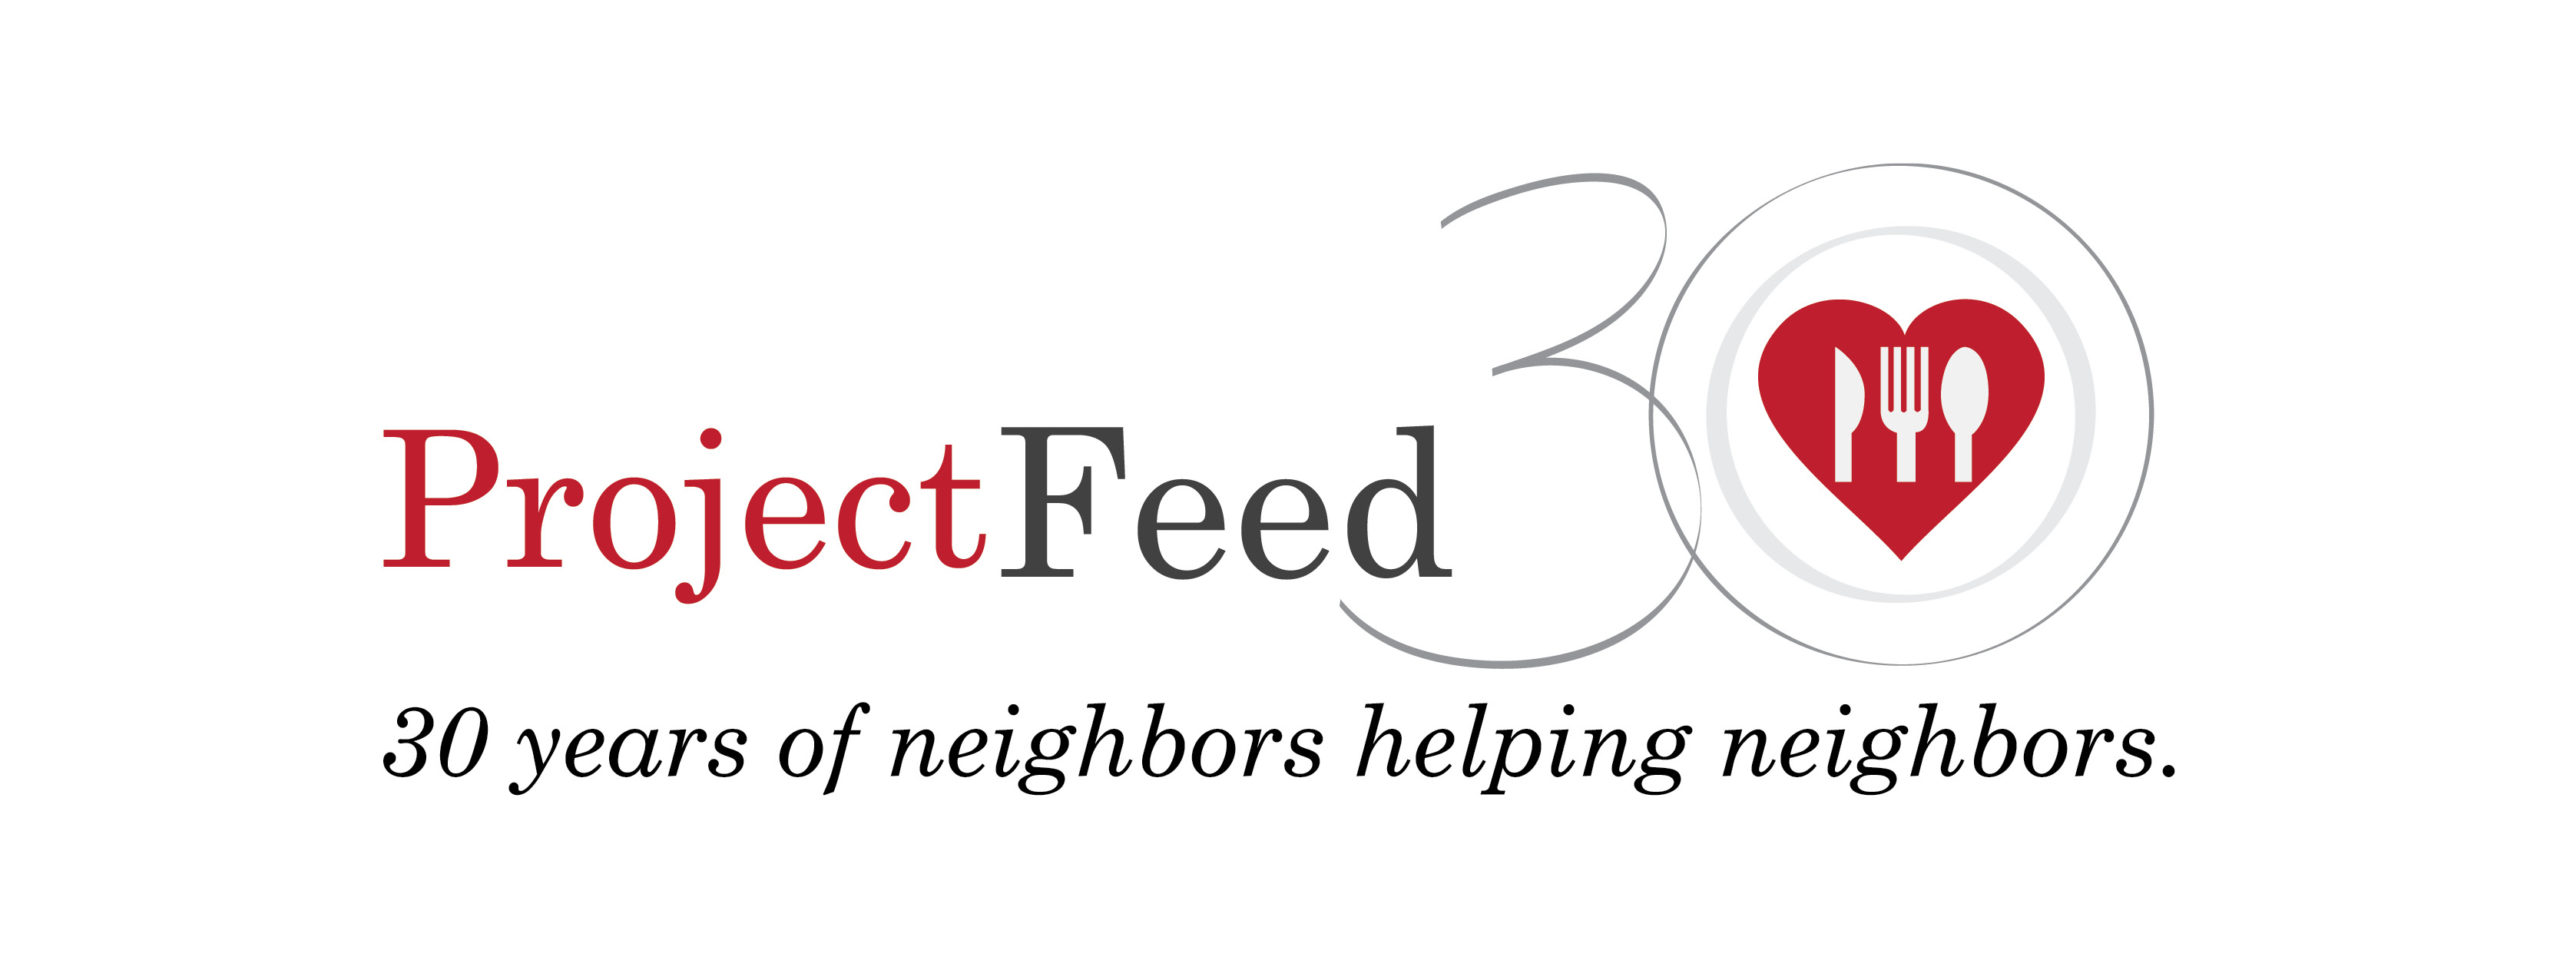 Project Feed the Thousands | Project Feed the Thousands